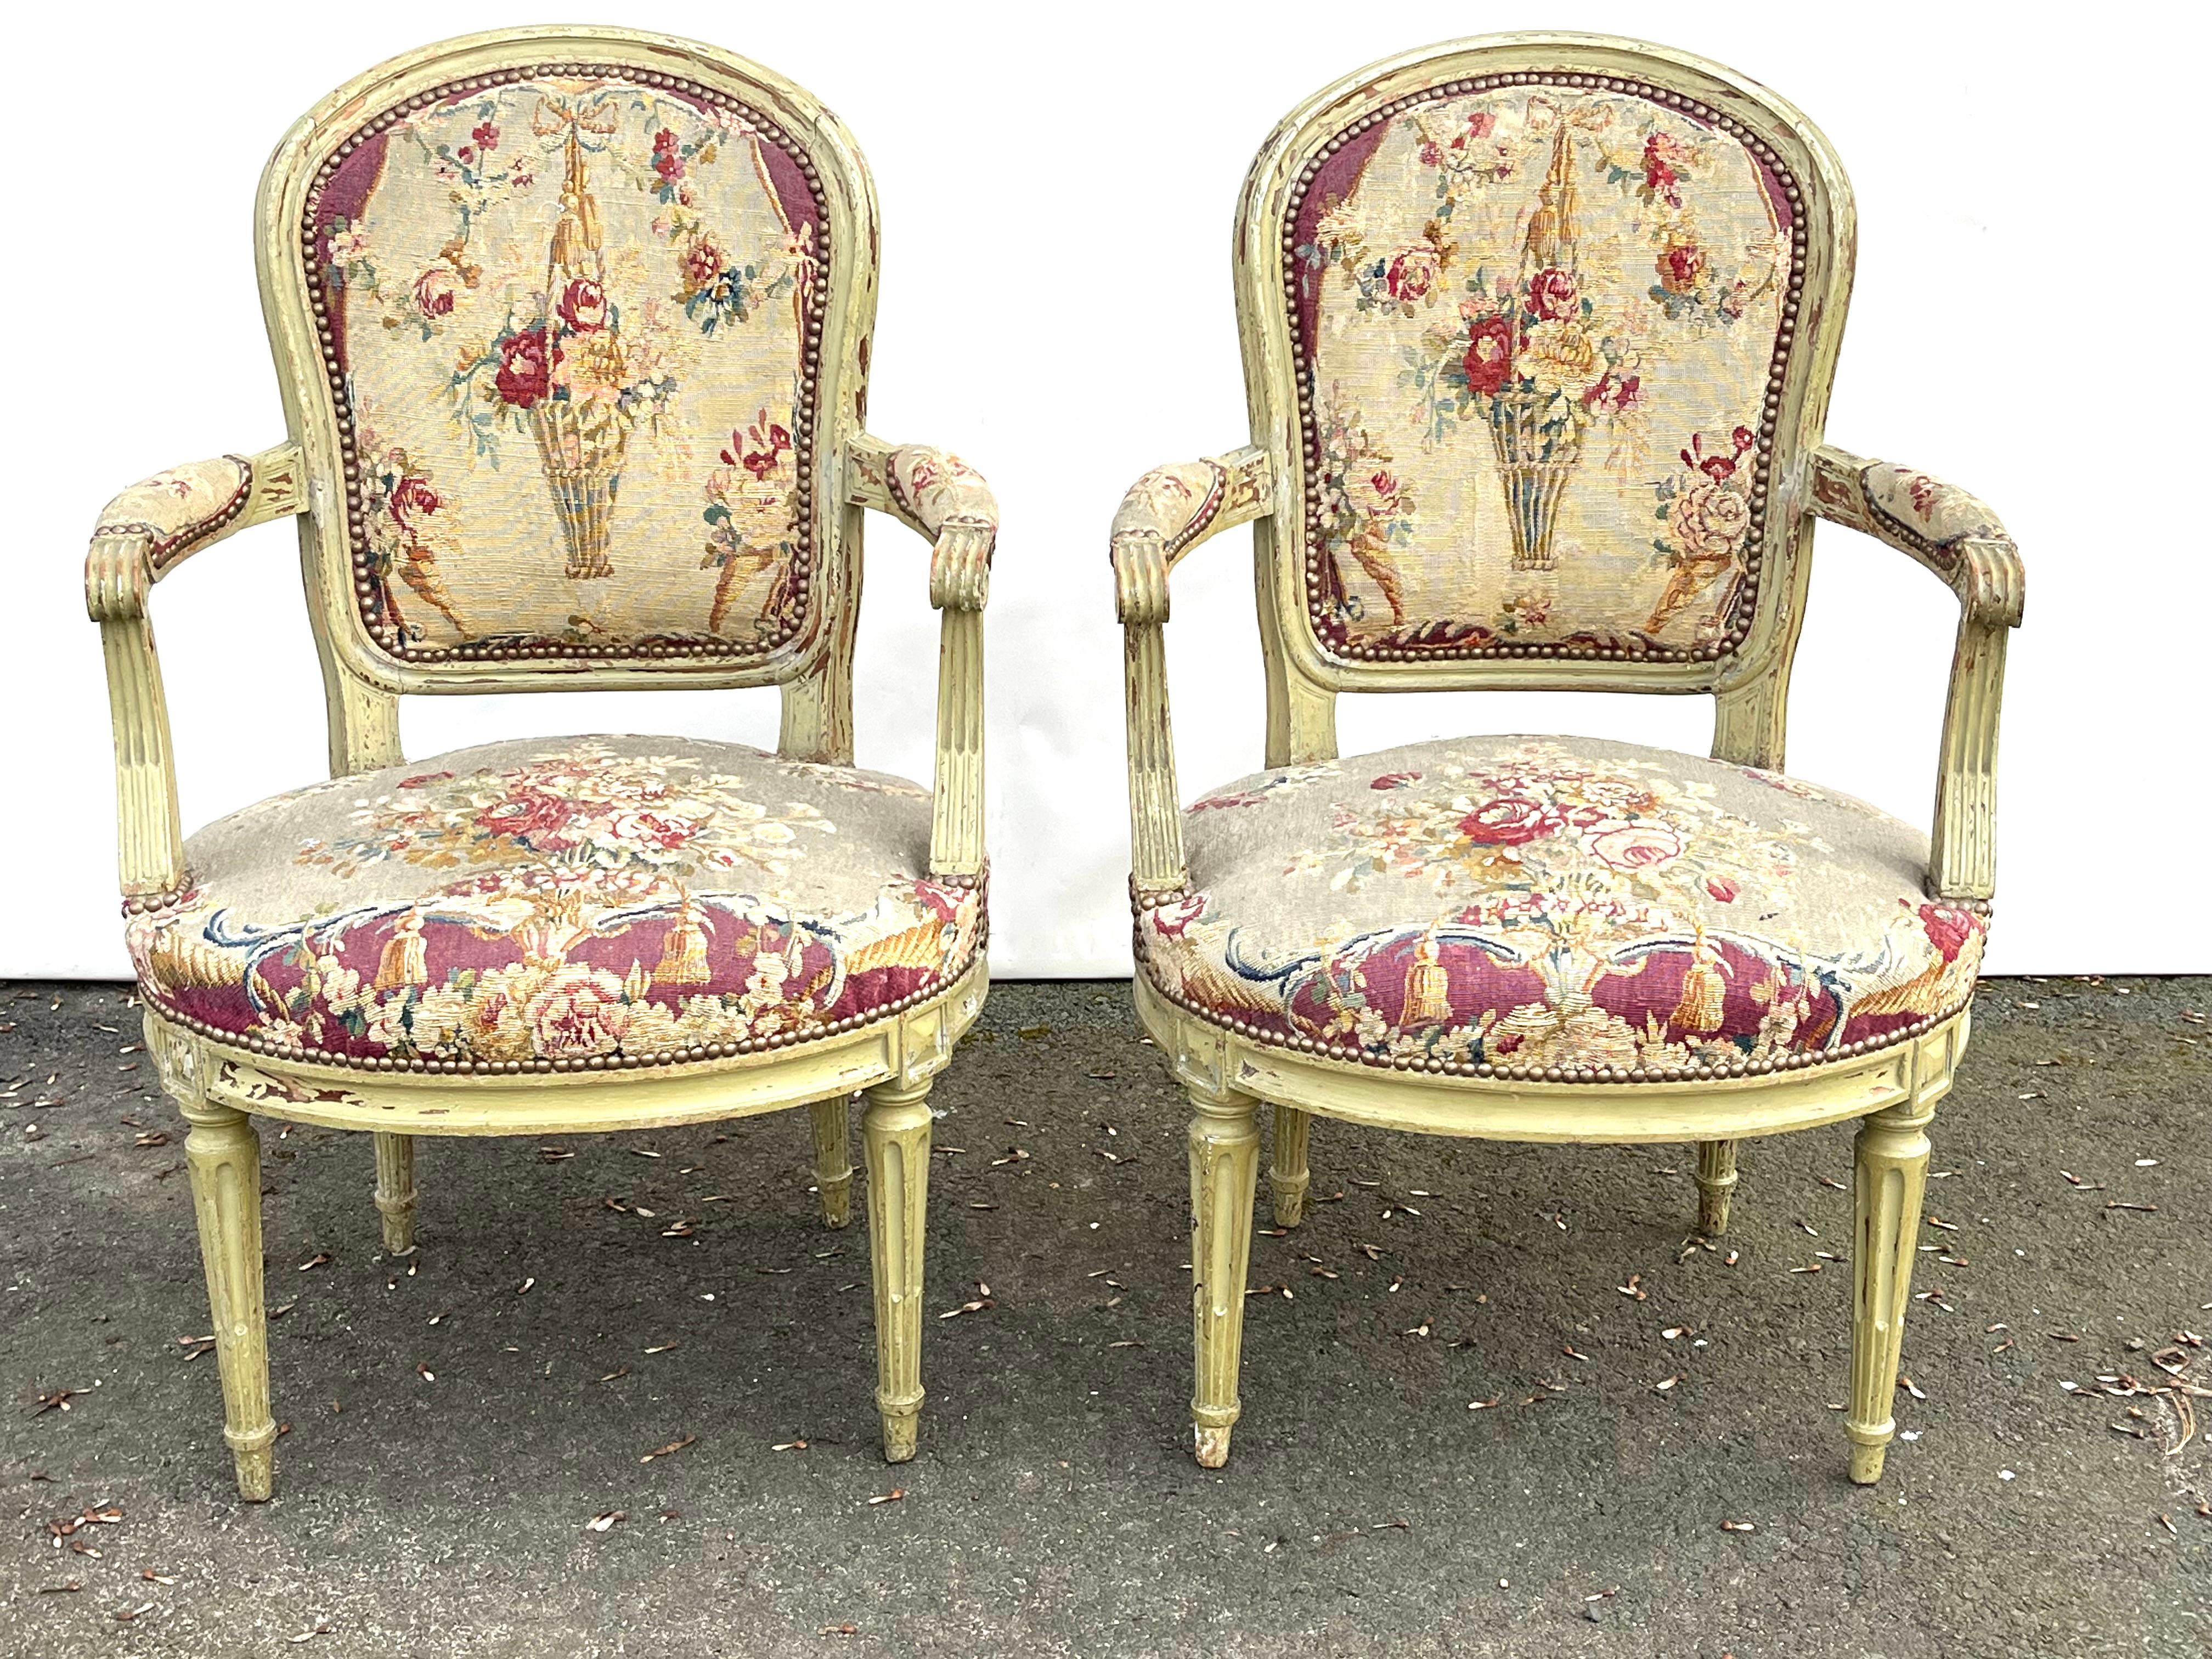 French Set of 4 Louis XVI Period Fauteuils Stamped ”F. Lapierre a Lyon” For Sale